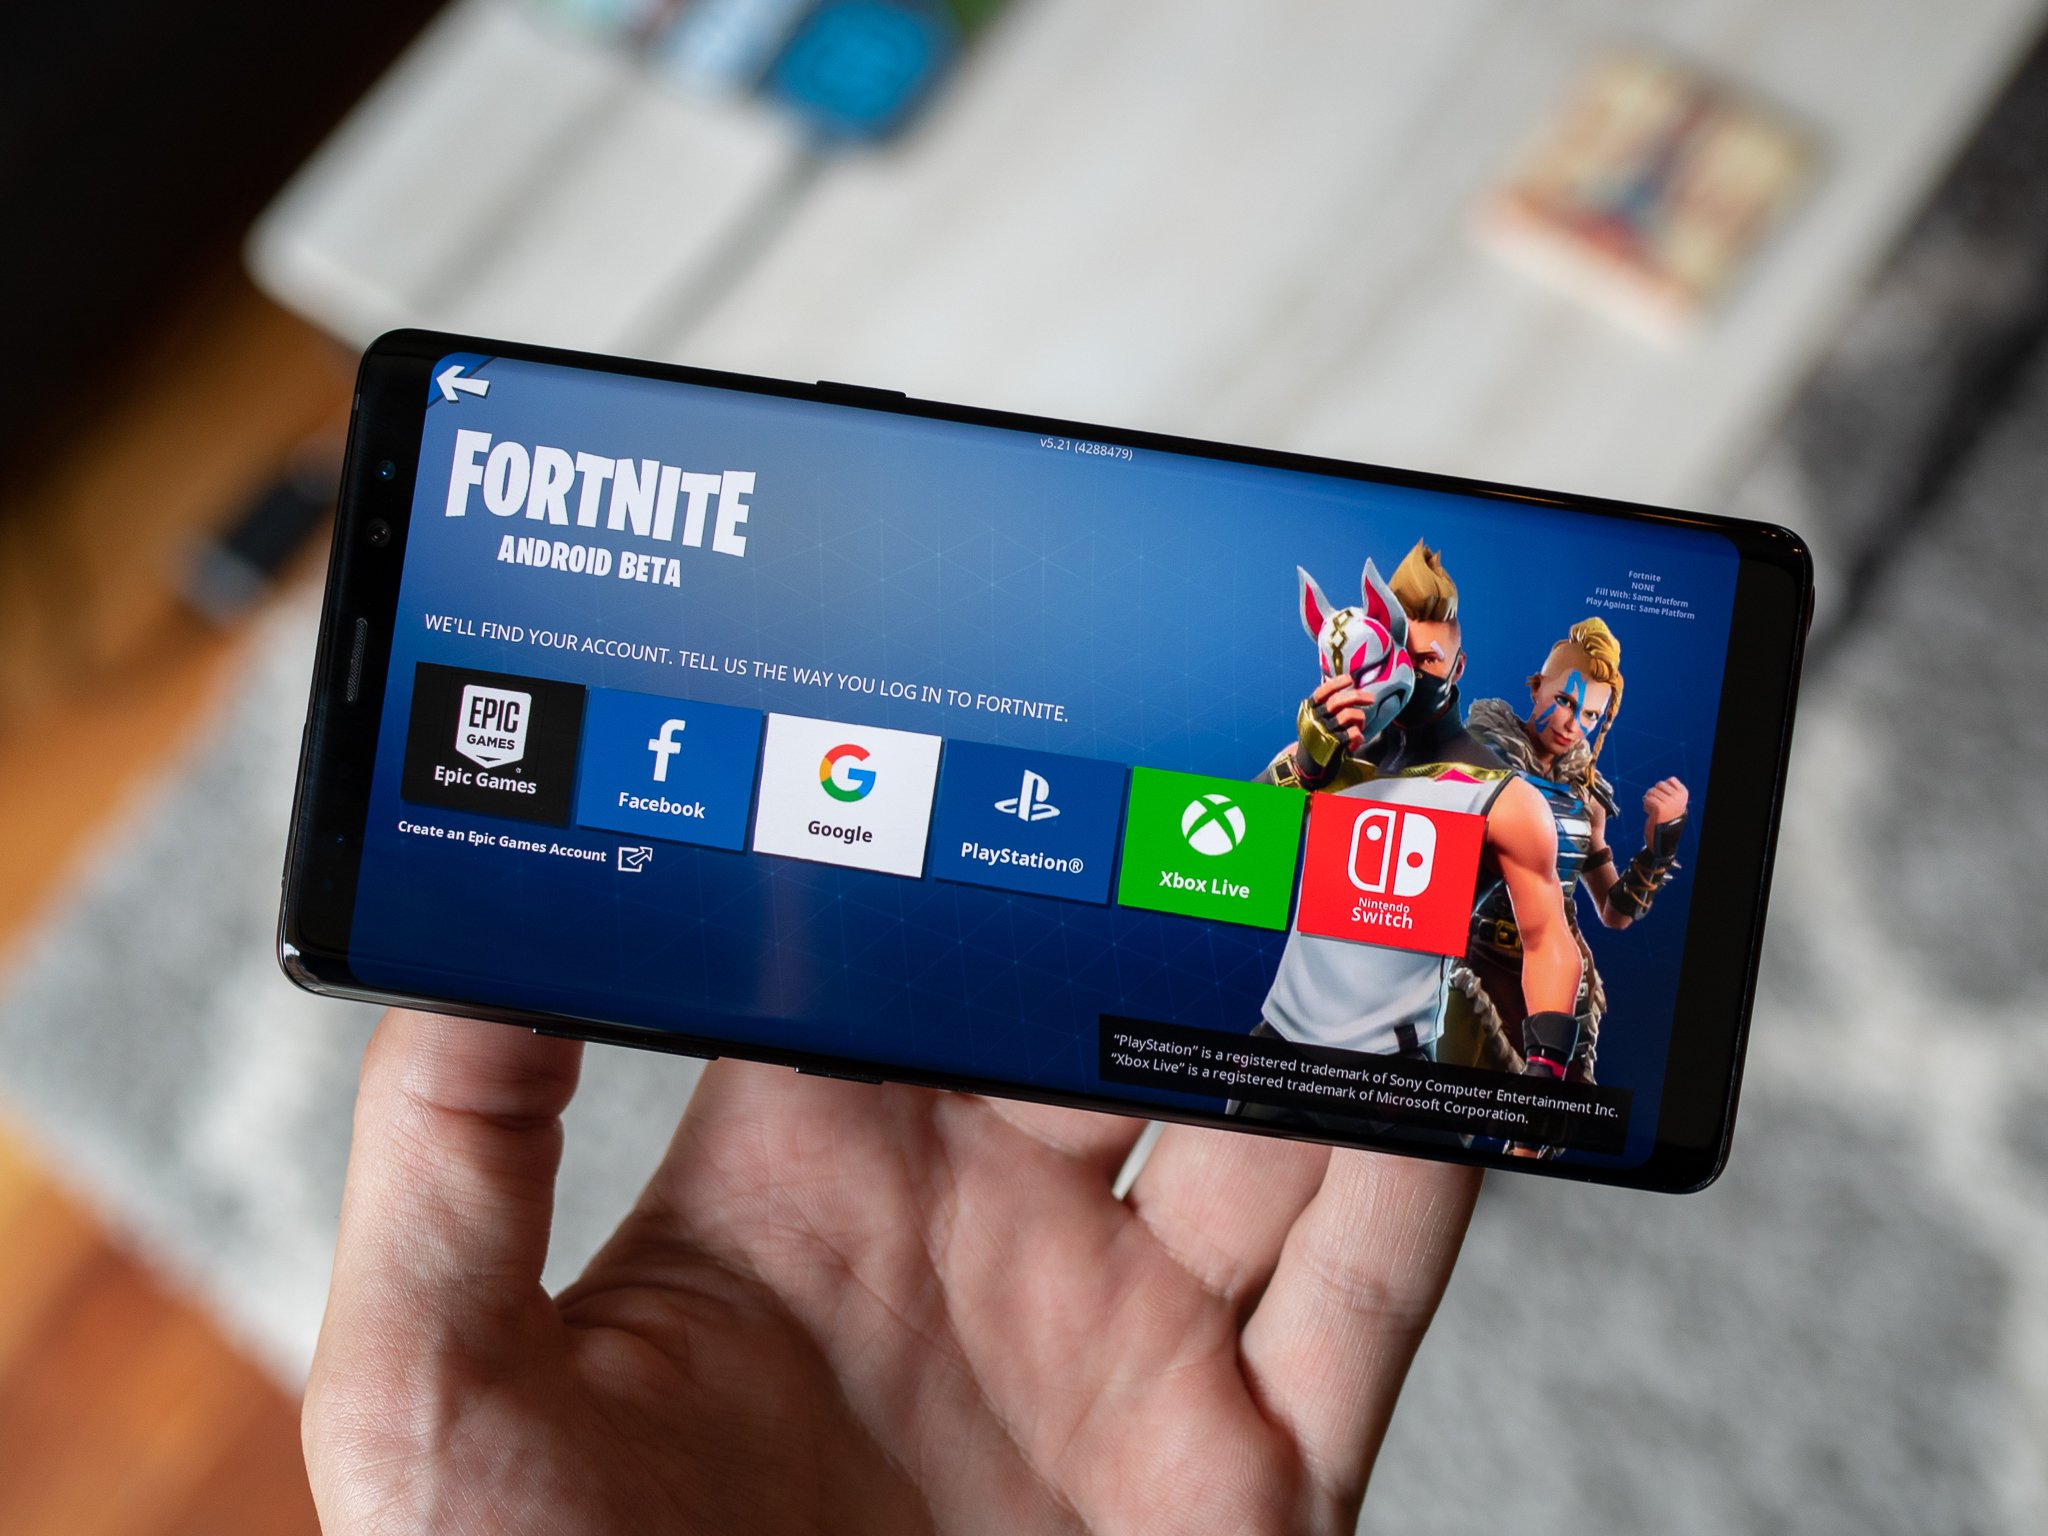 fortnite is skipping google play on android and the beta is already in full swing if you have a child eager to play fortnite on their android device - fortnite for android app store